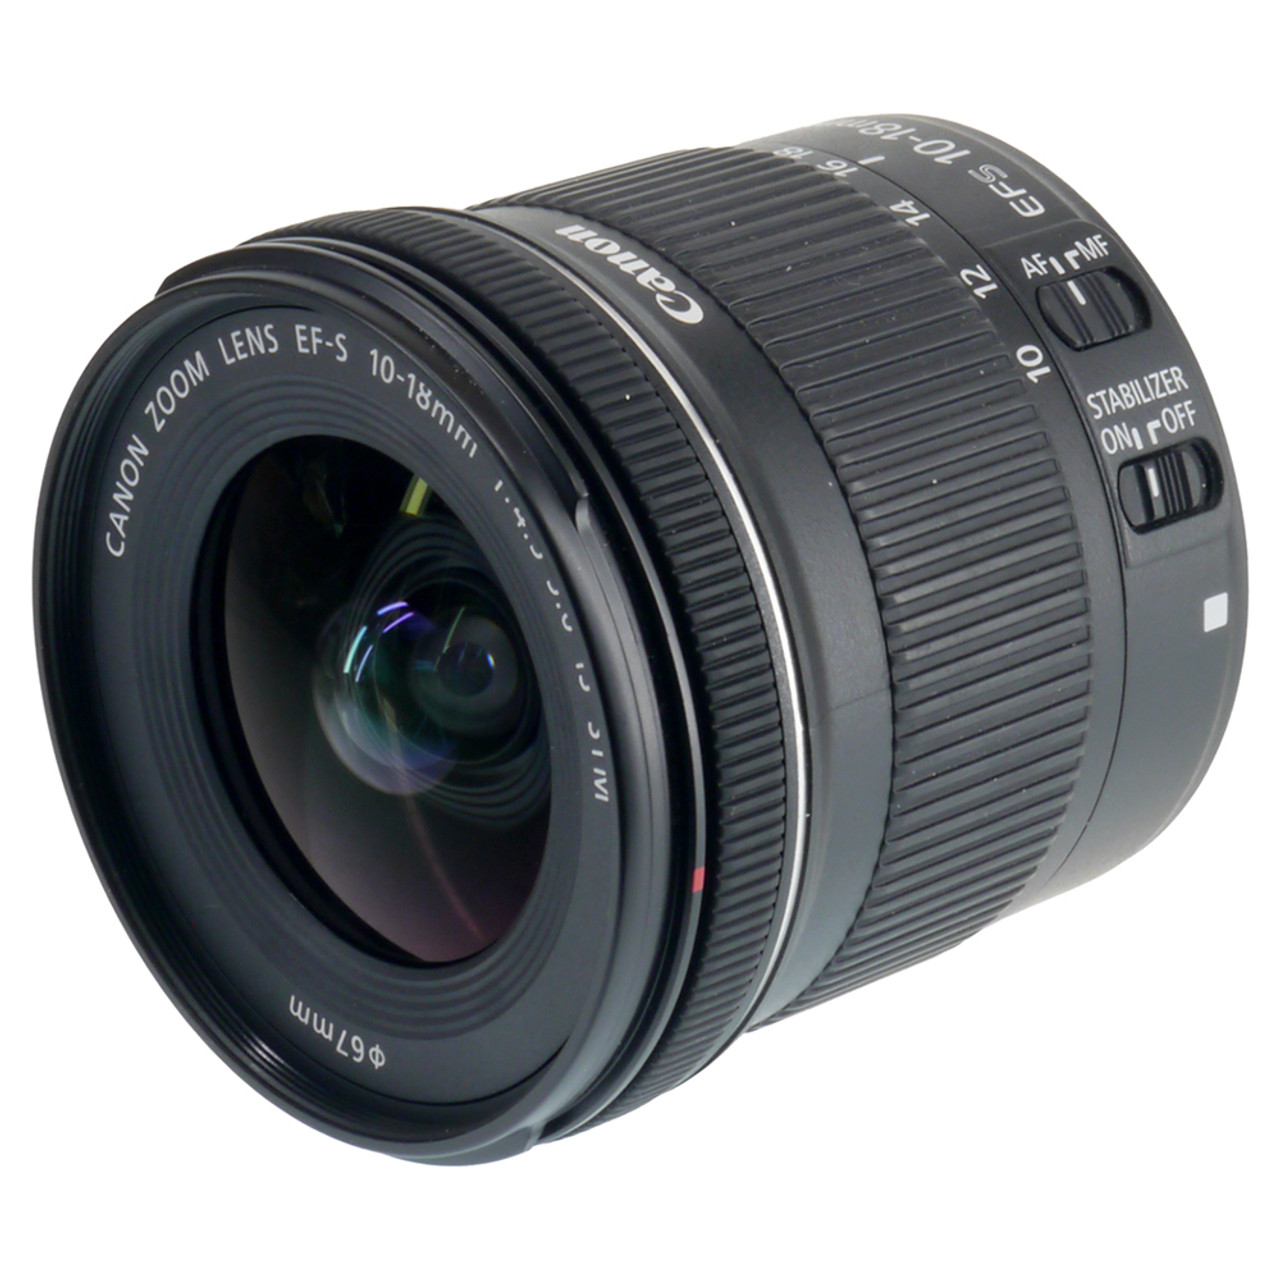 USED CANON EF-S 10-18MM F4.5-5.6 IS STM (763871)